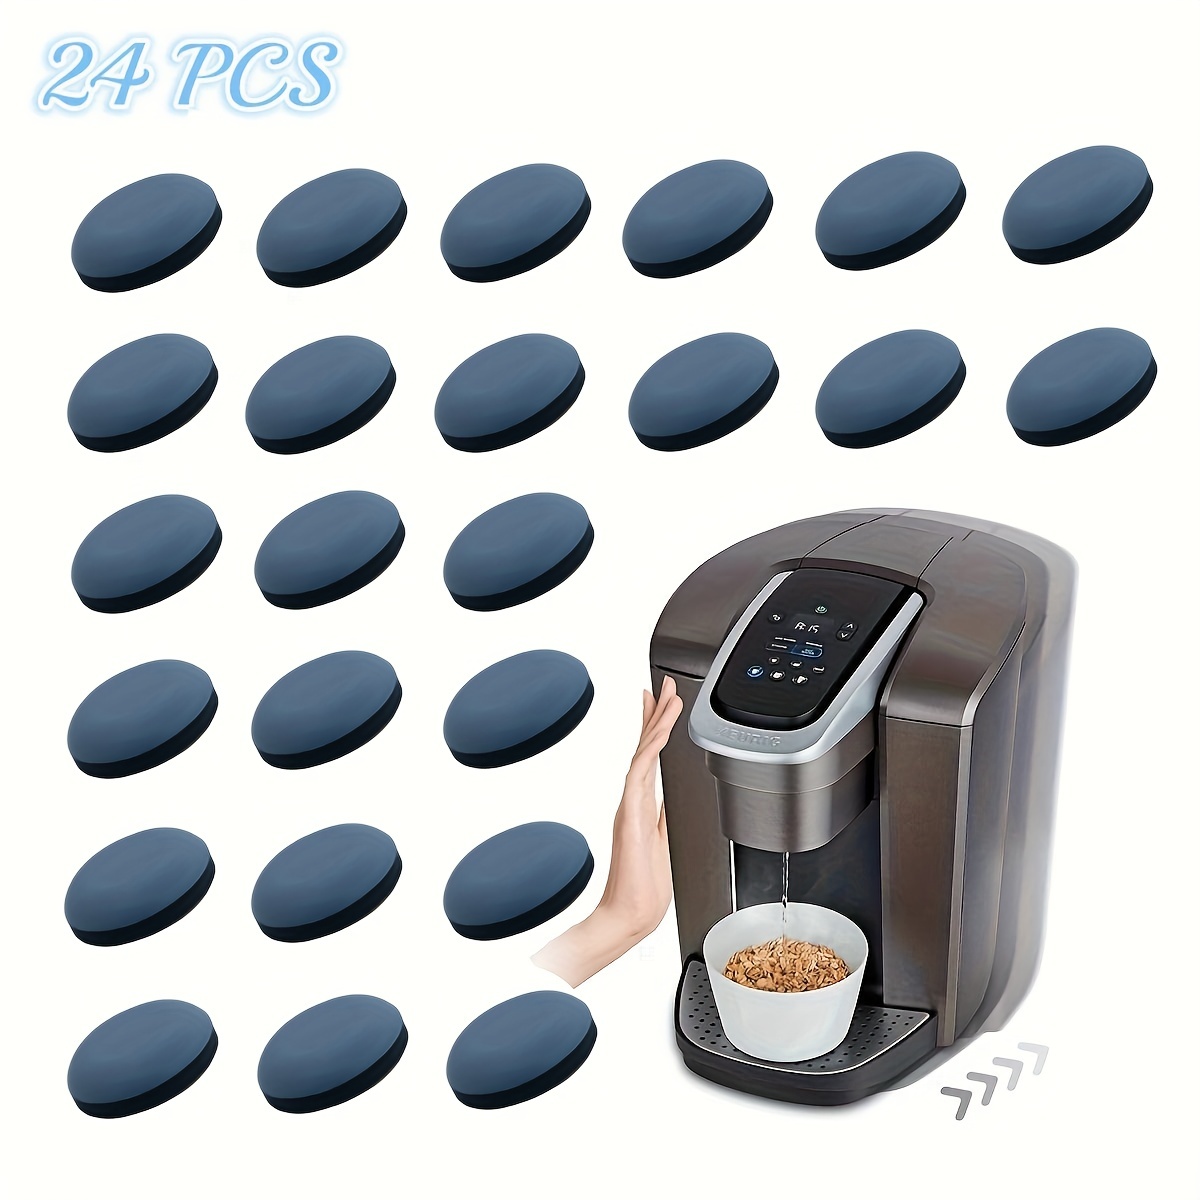 Sliders For Kitchen Appliances 24pcs Self-Adhesive Mover For Small